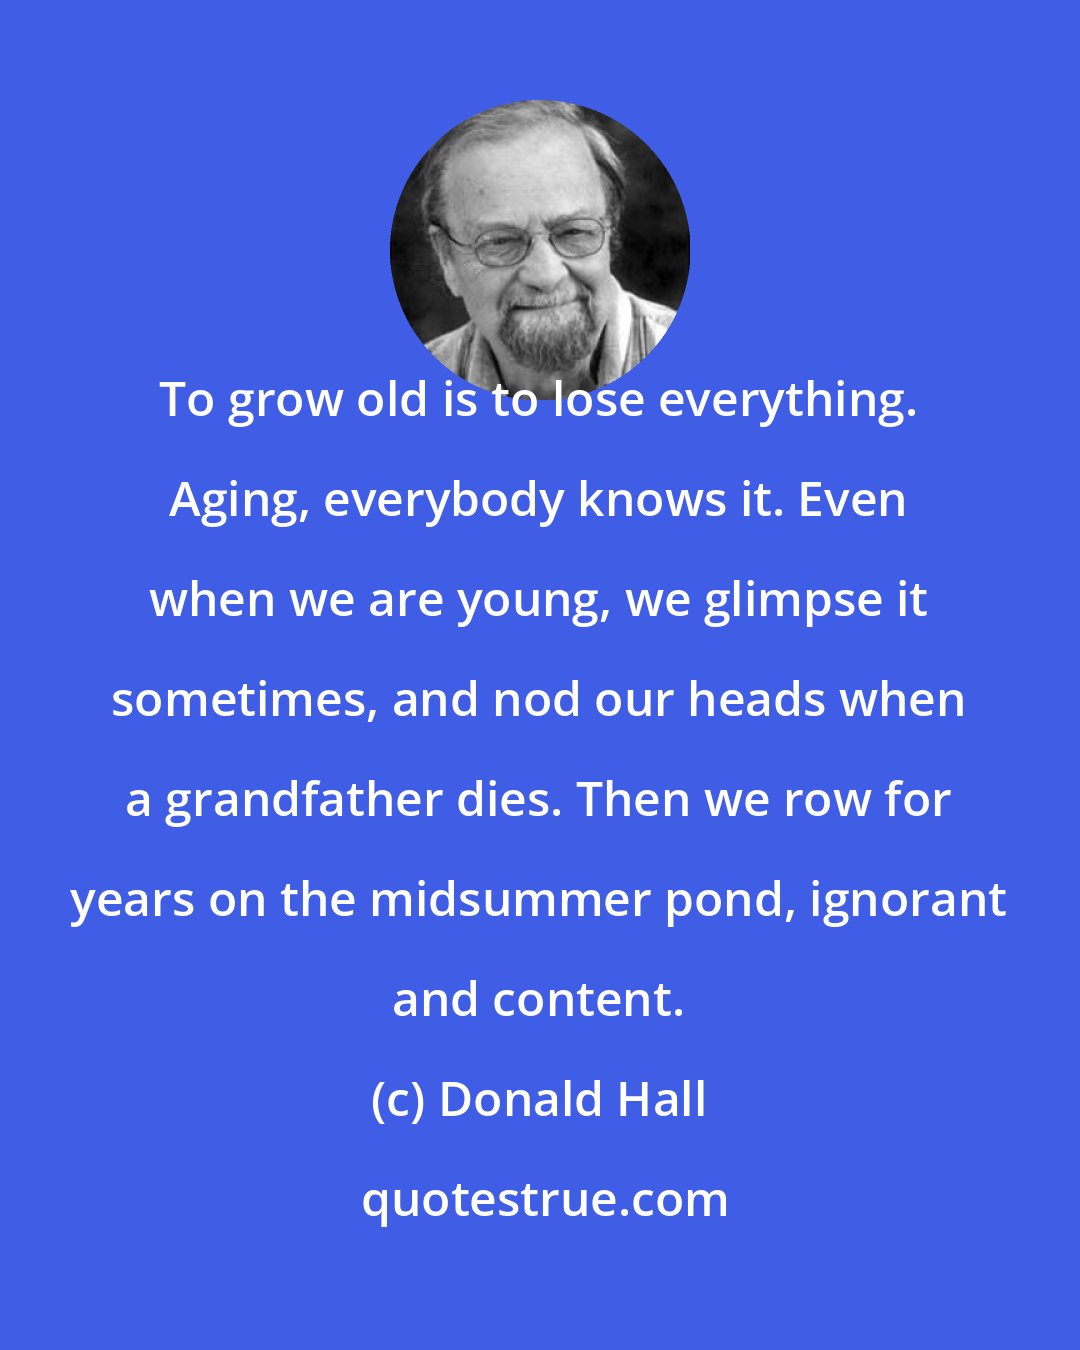 Donald Hall: To grow old is to lose everything. Aging, everybody knows it. Even when we are young, we glimpse it sometimes, and nod our heads when a grandfather dies. Then we row for years on the midsummer pond, ignorant and content.